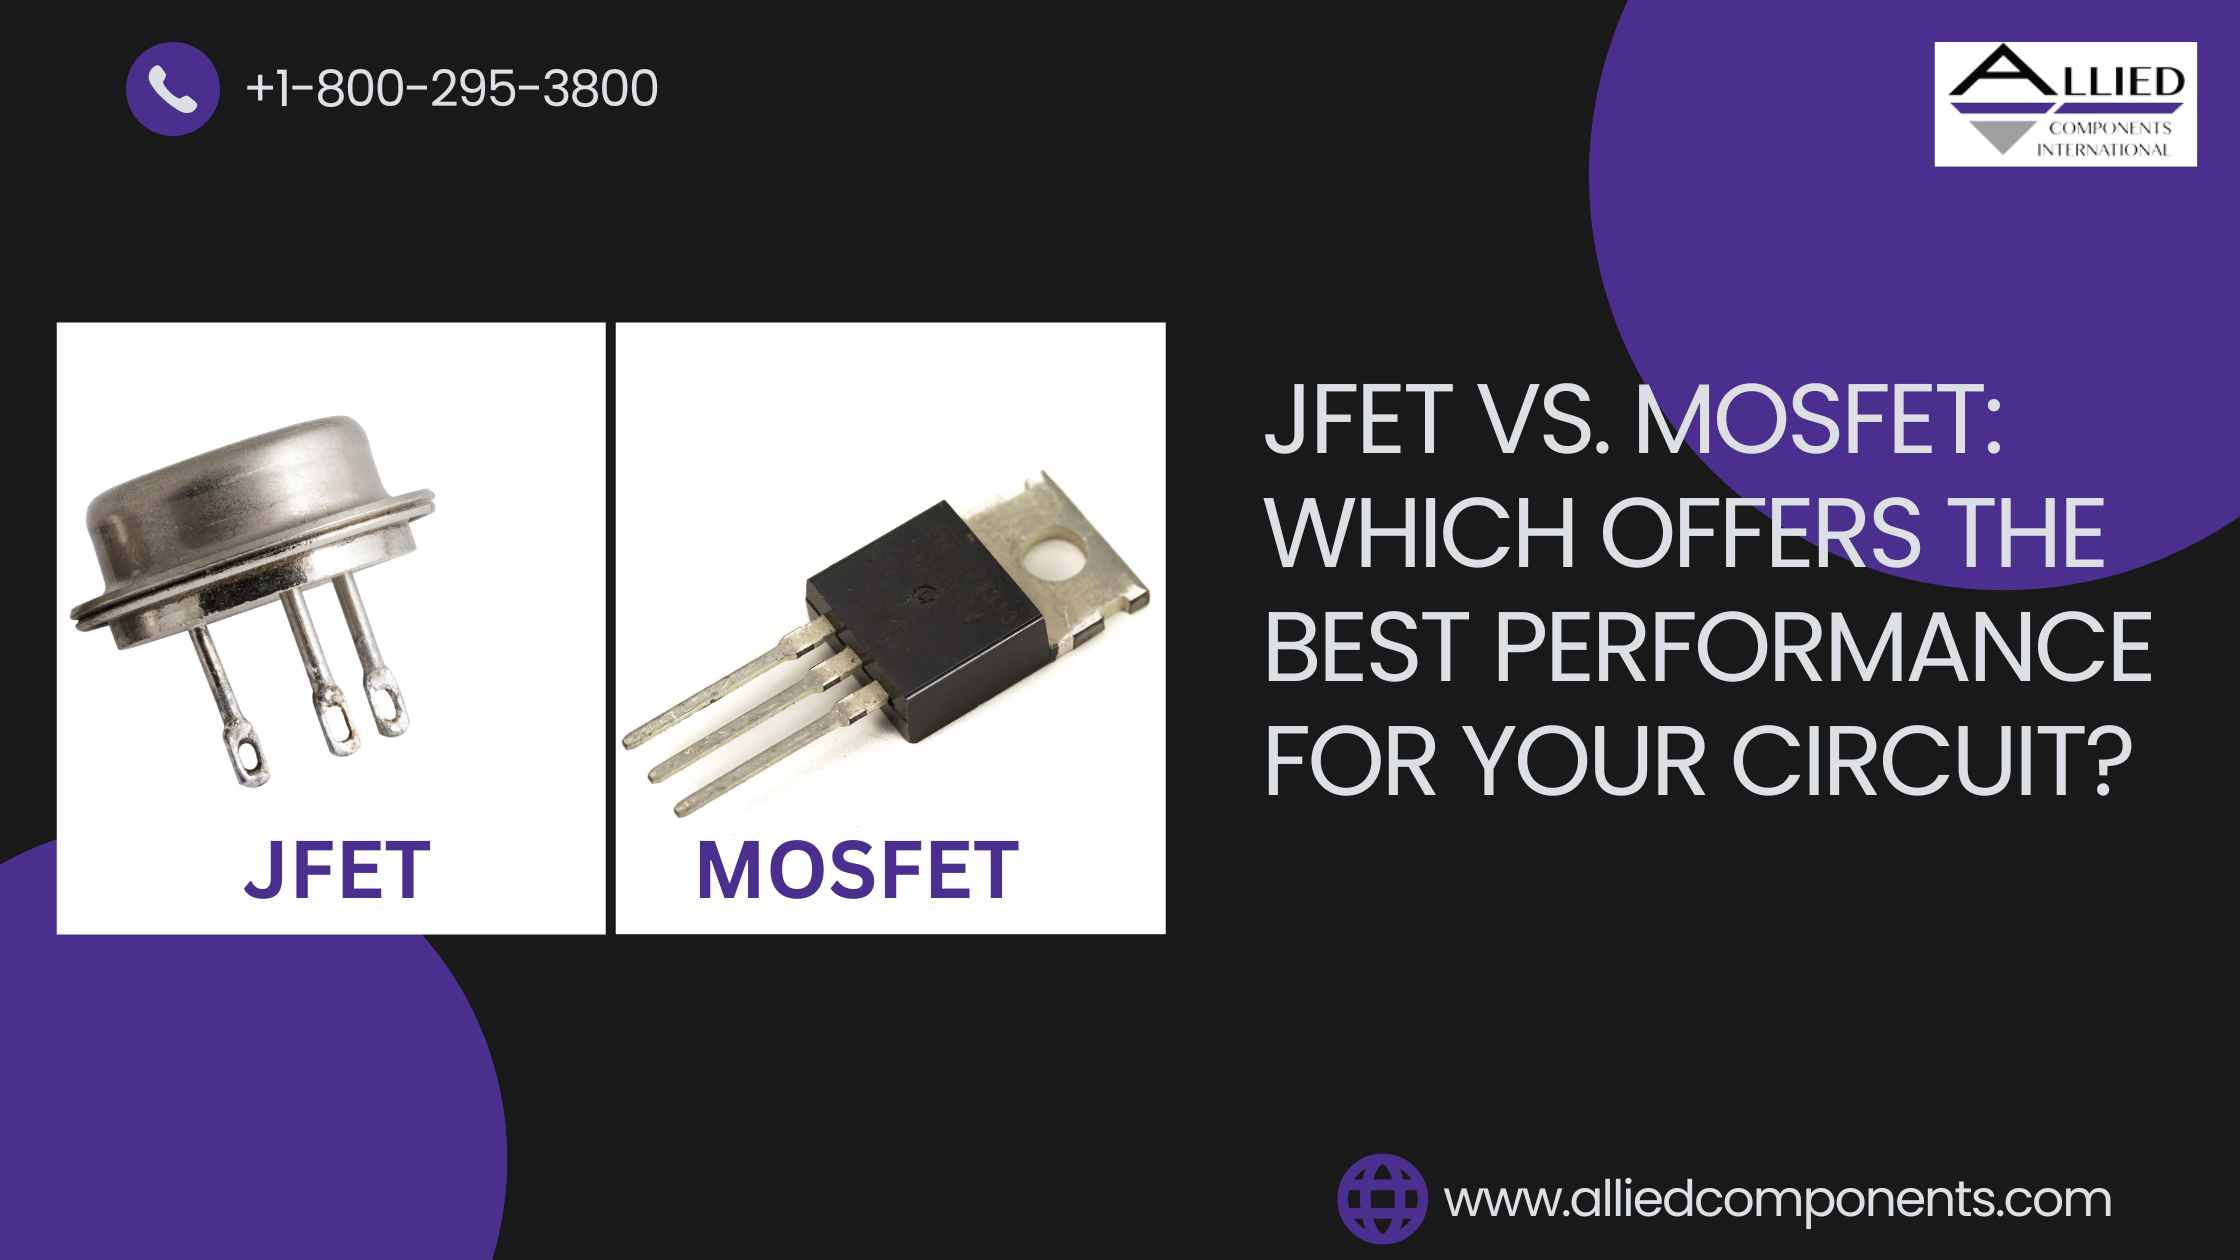 JFET Vs. MOSFET: Which Offers the Best Performance for Your Circuit?